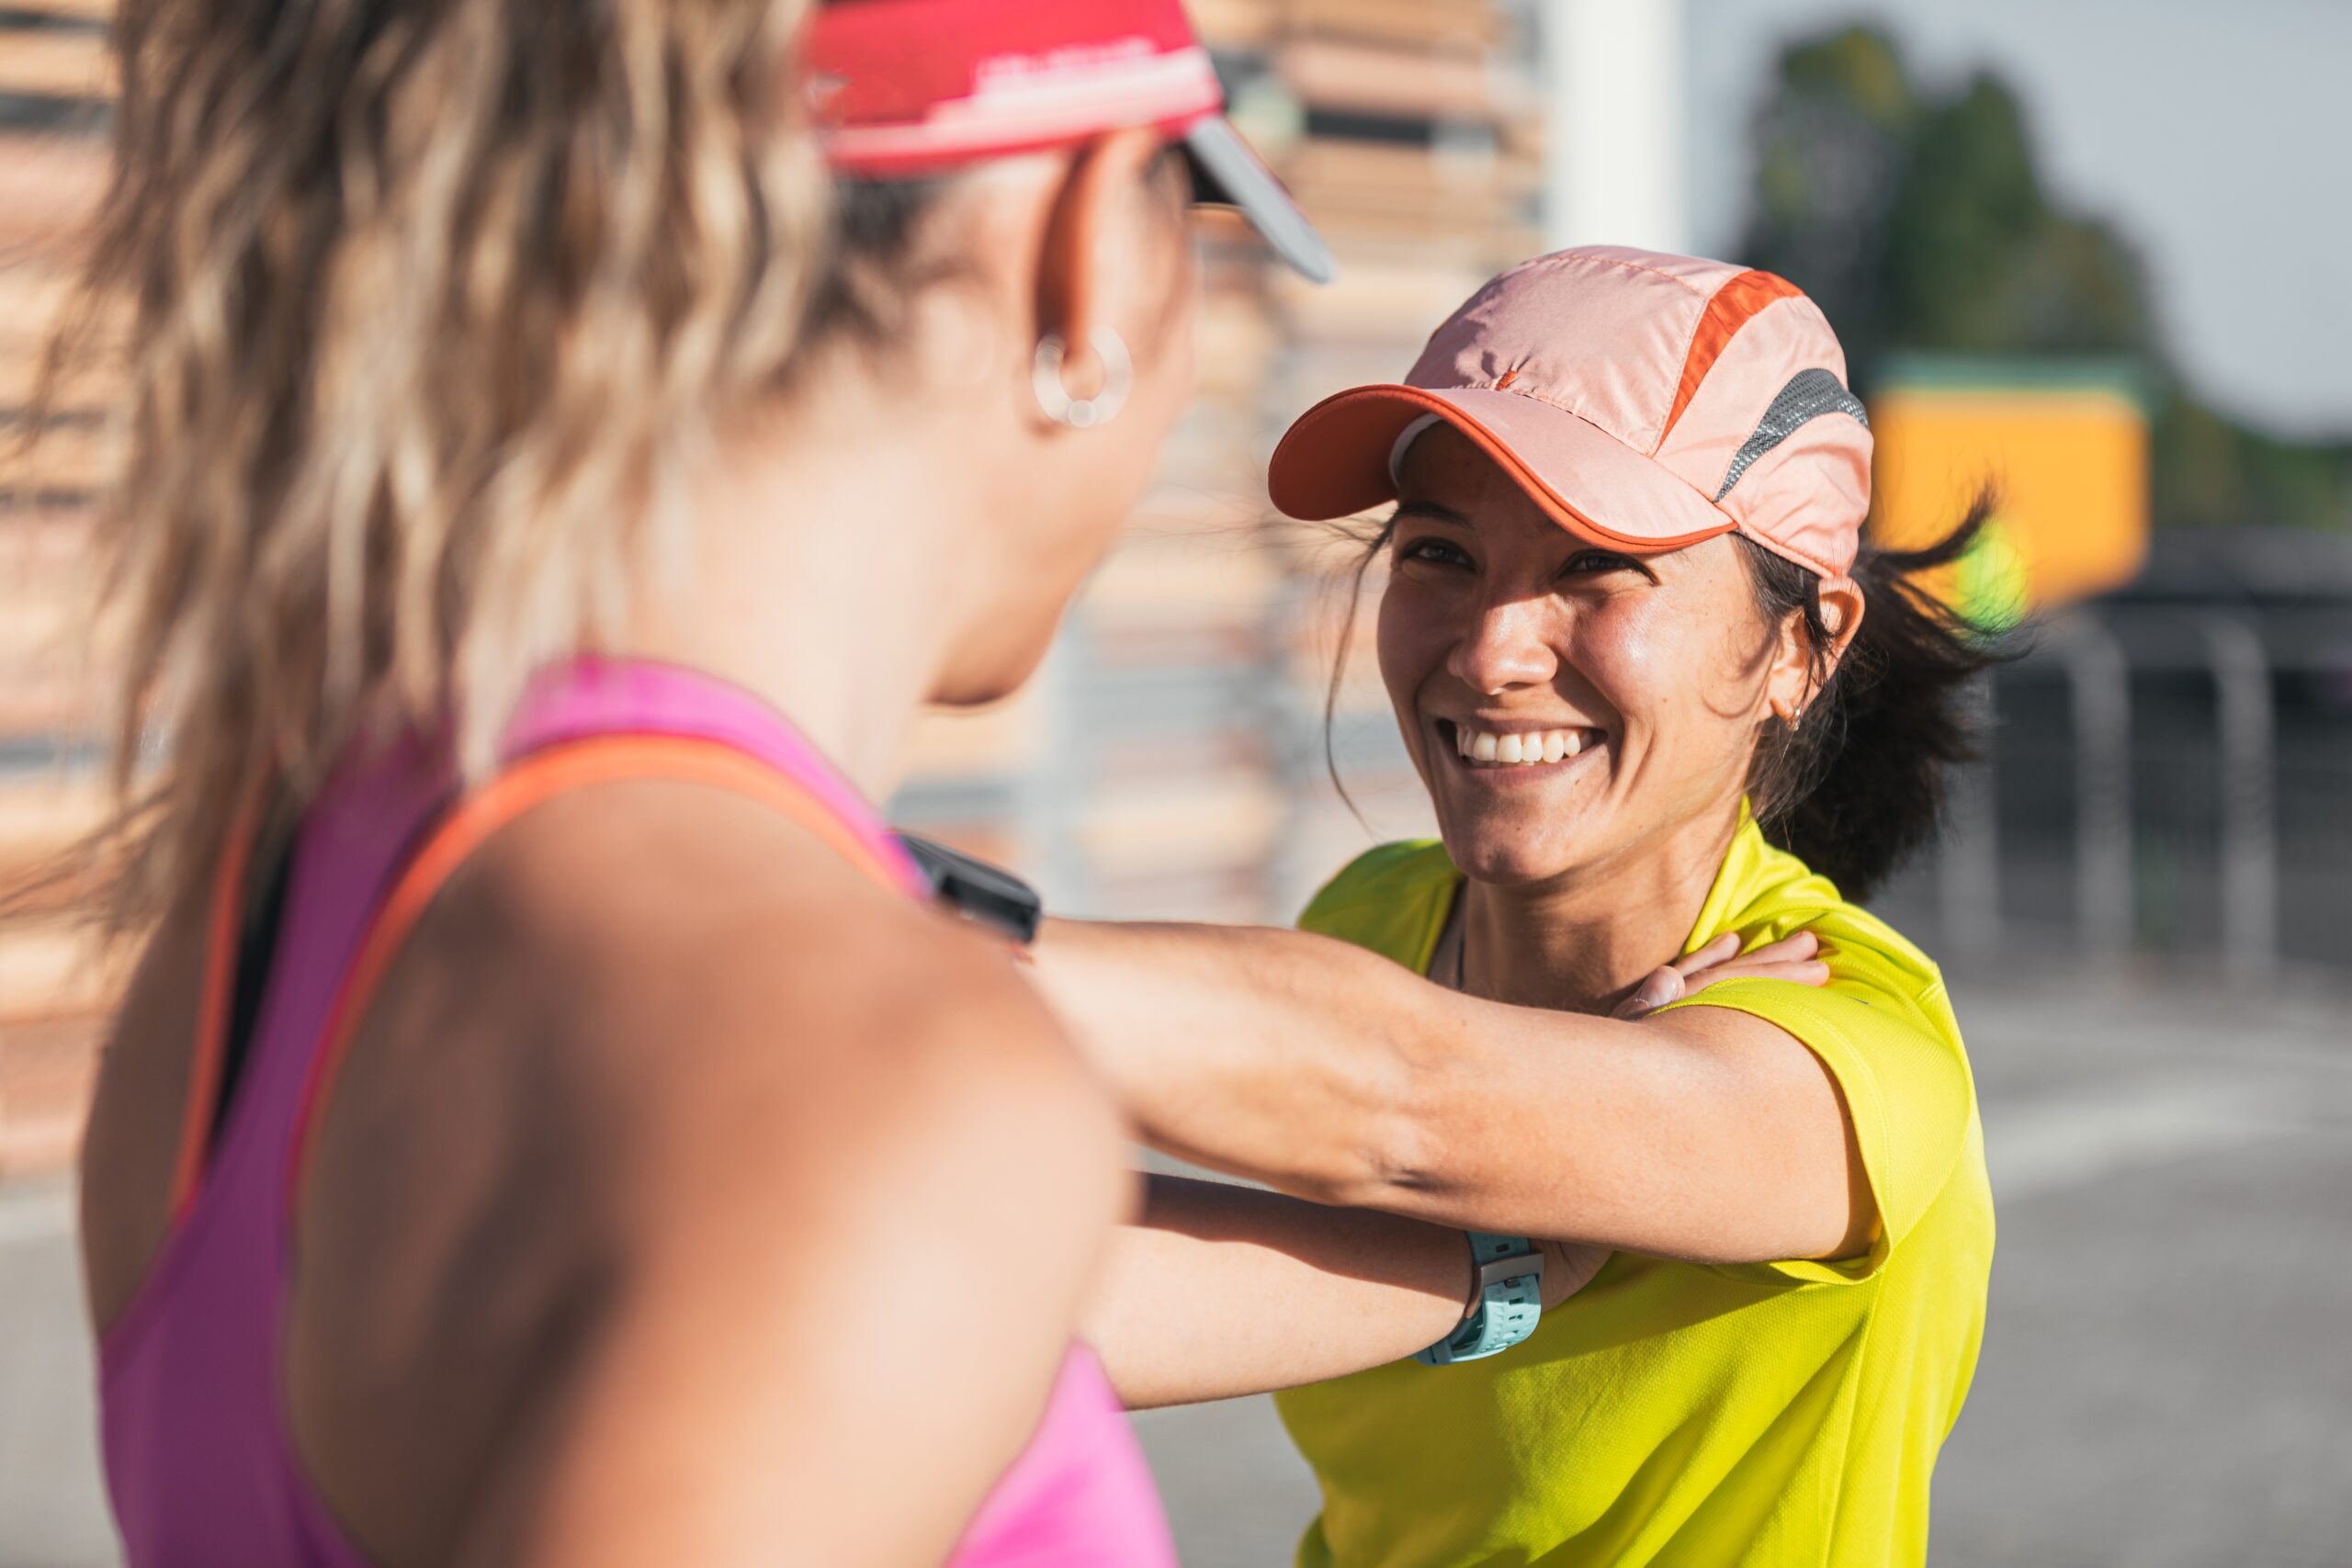 Two women prepare for a running workout by supporting each other as the stretch